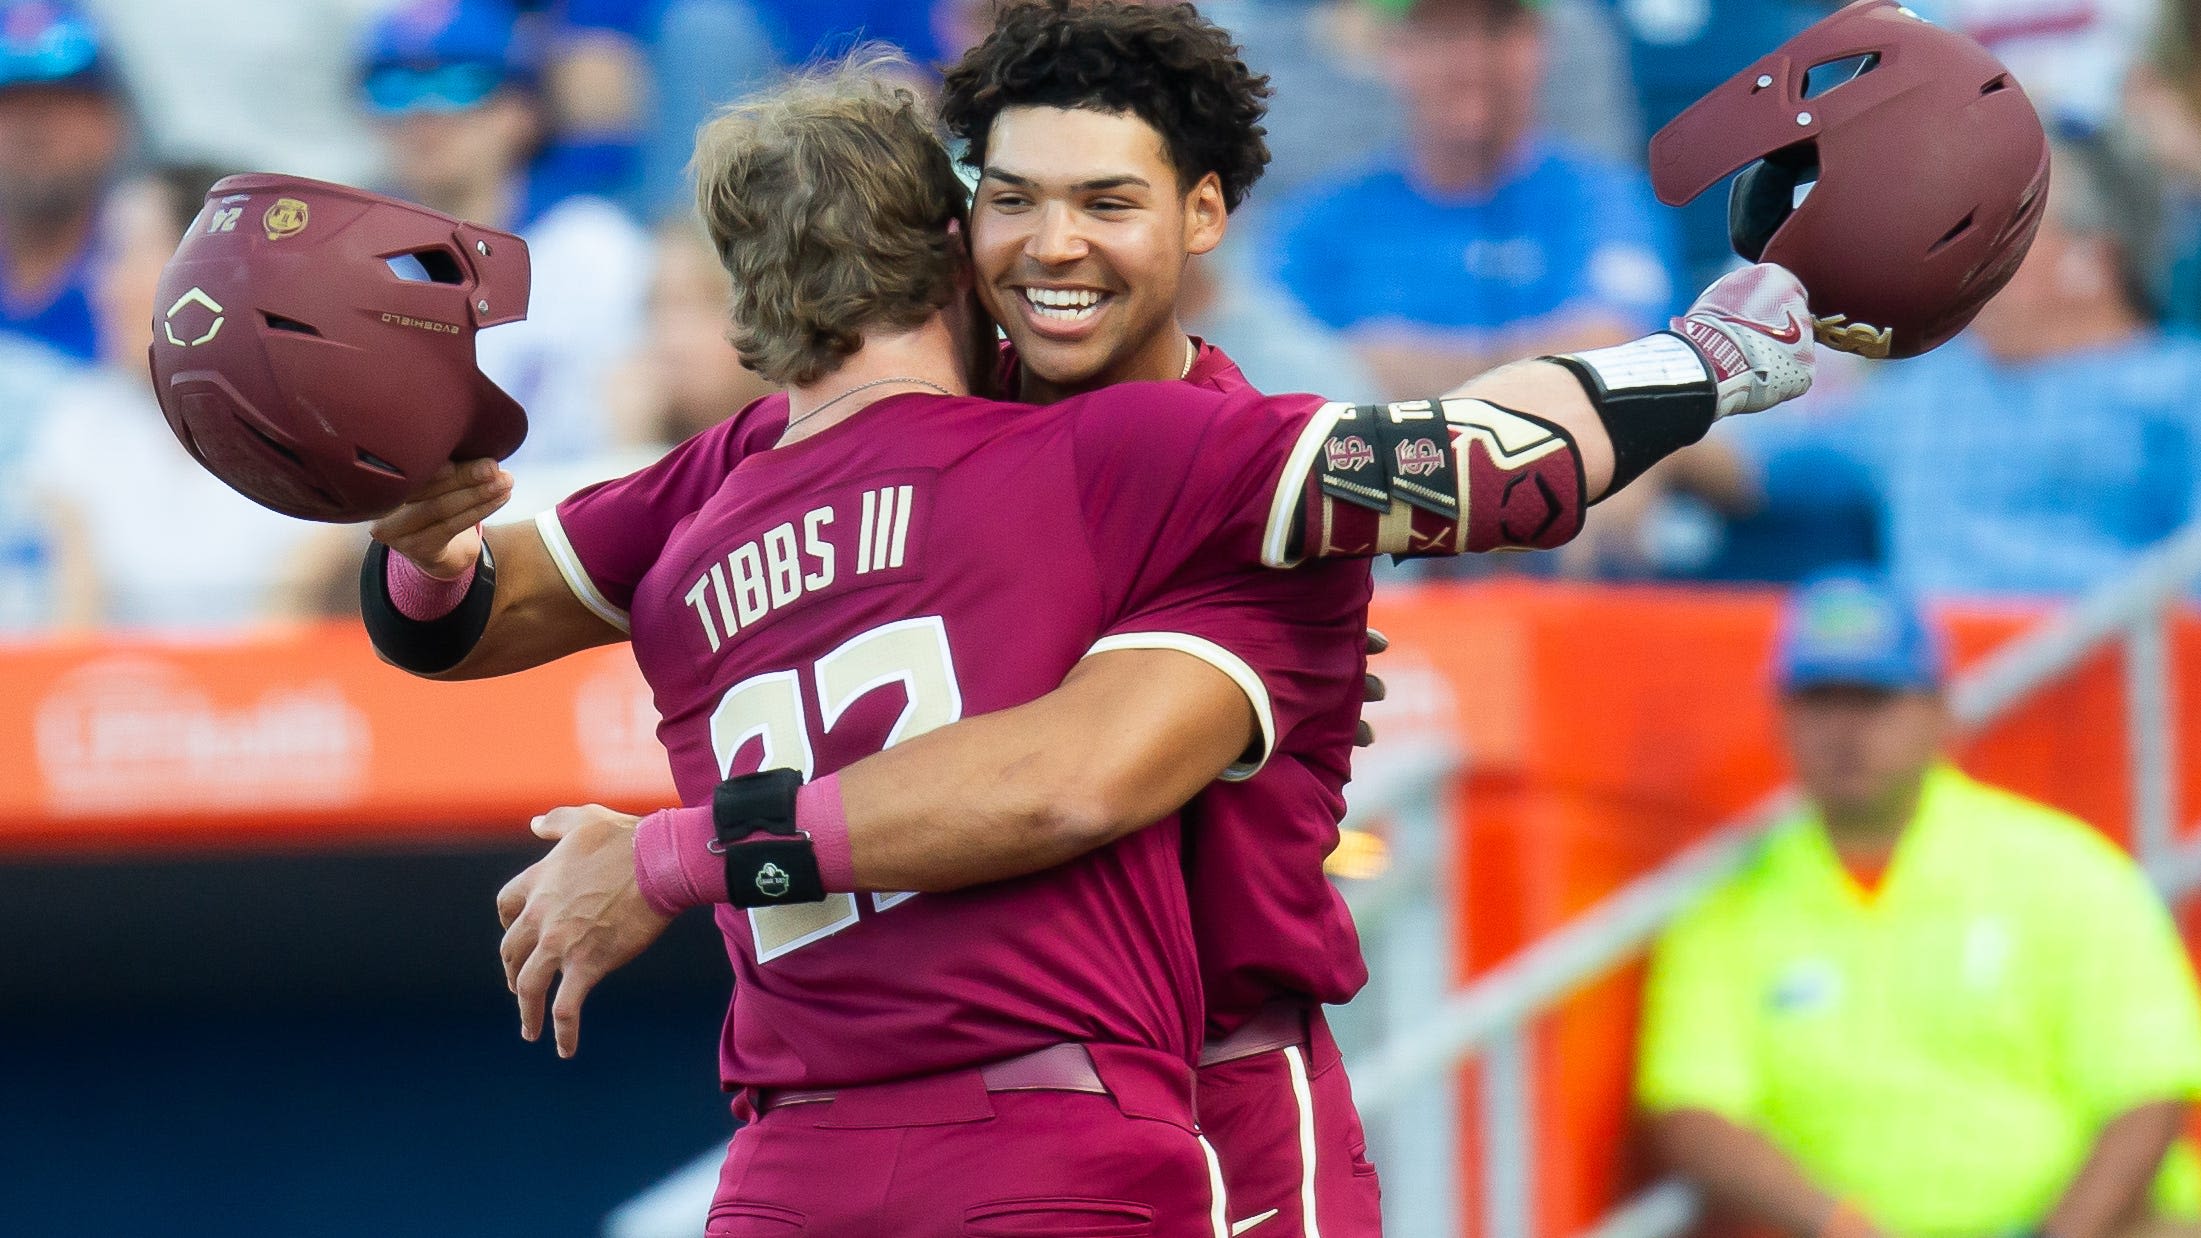 James Tibbs, Cam Smith MLB mock draft, scouting reports: Where will FSU stars be picked?